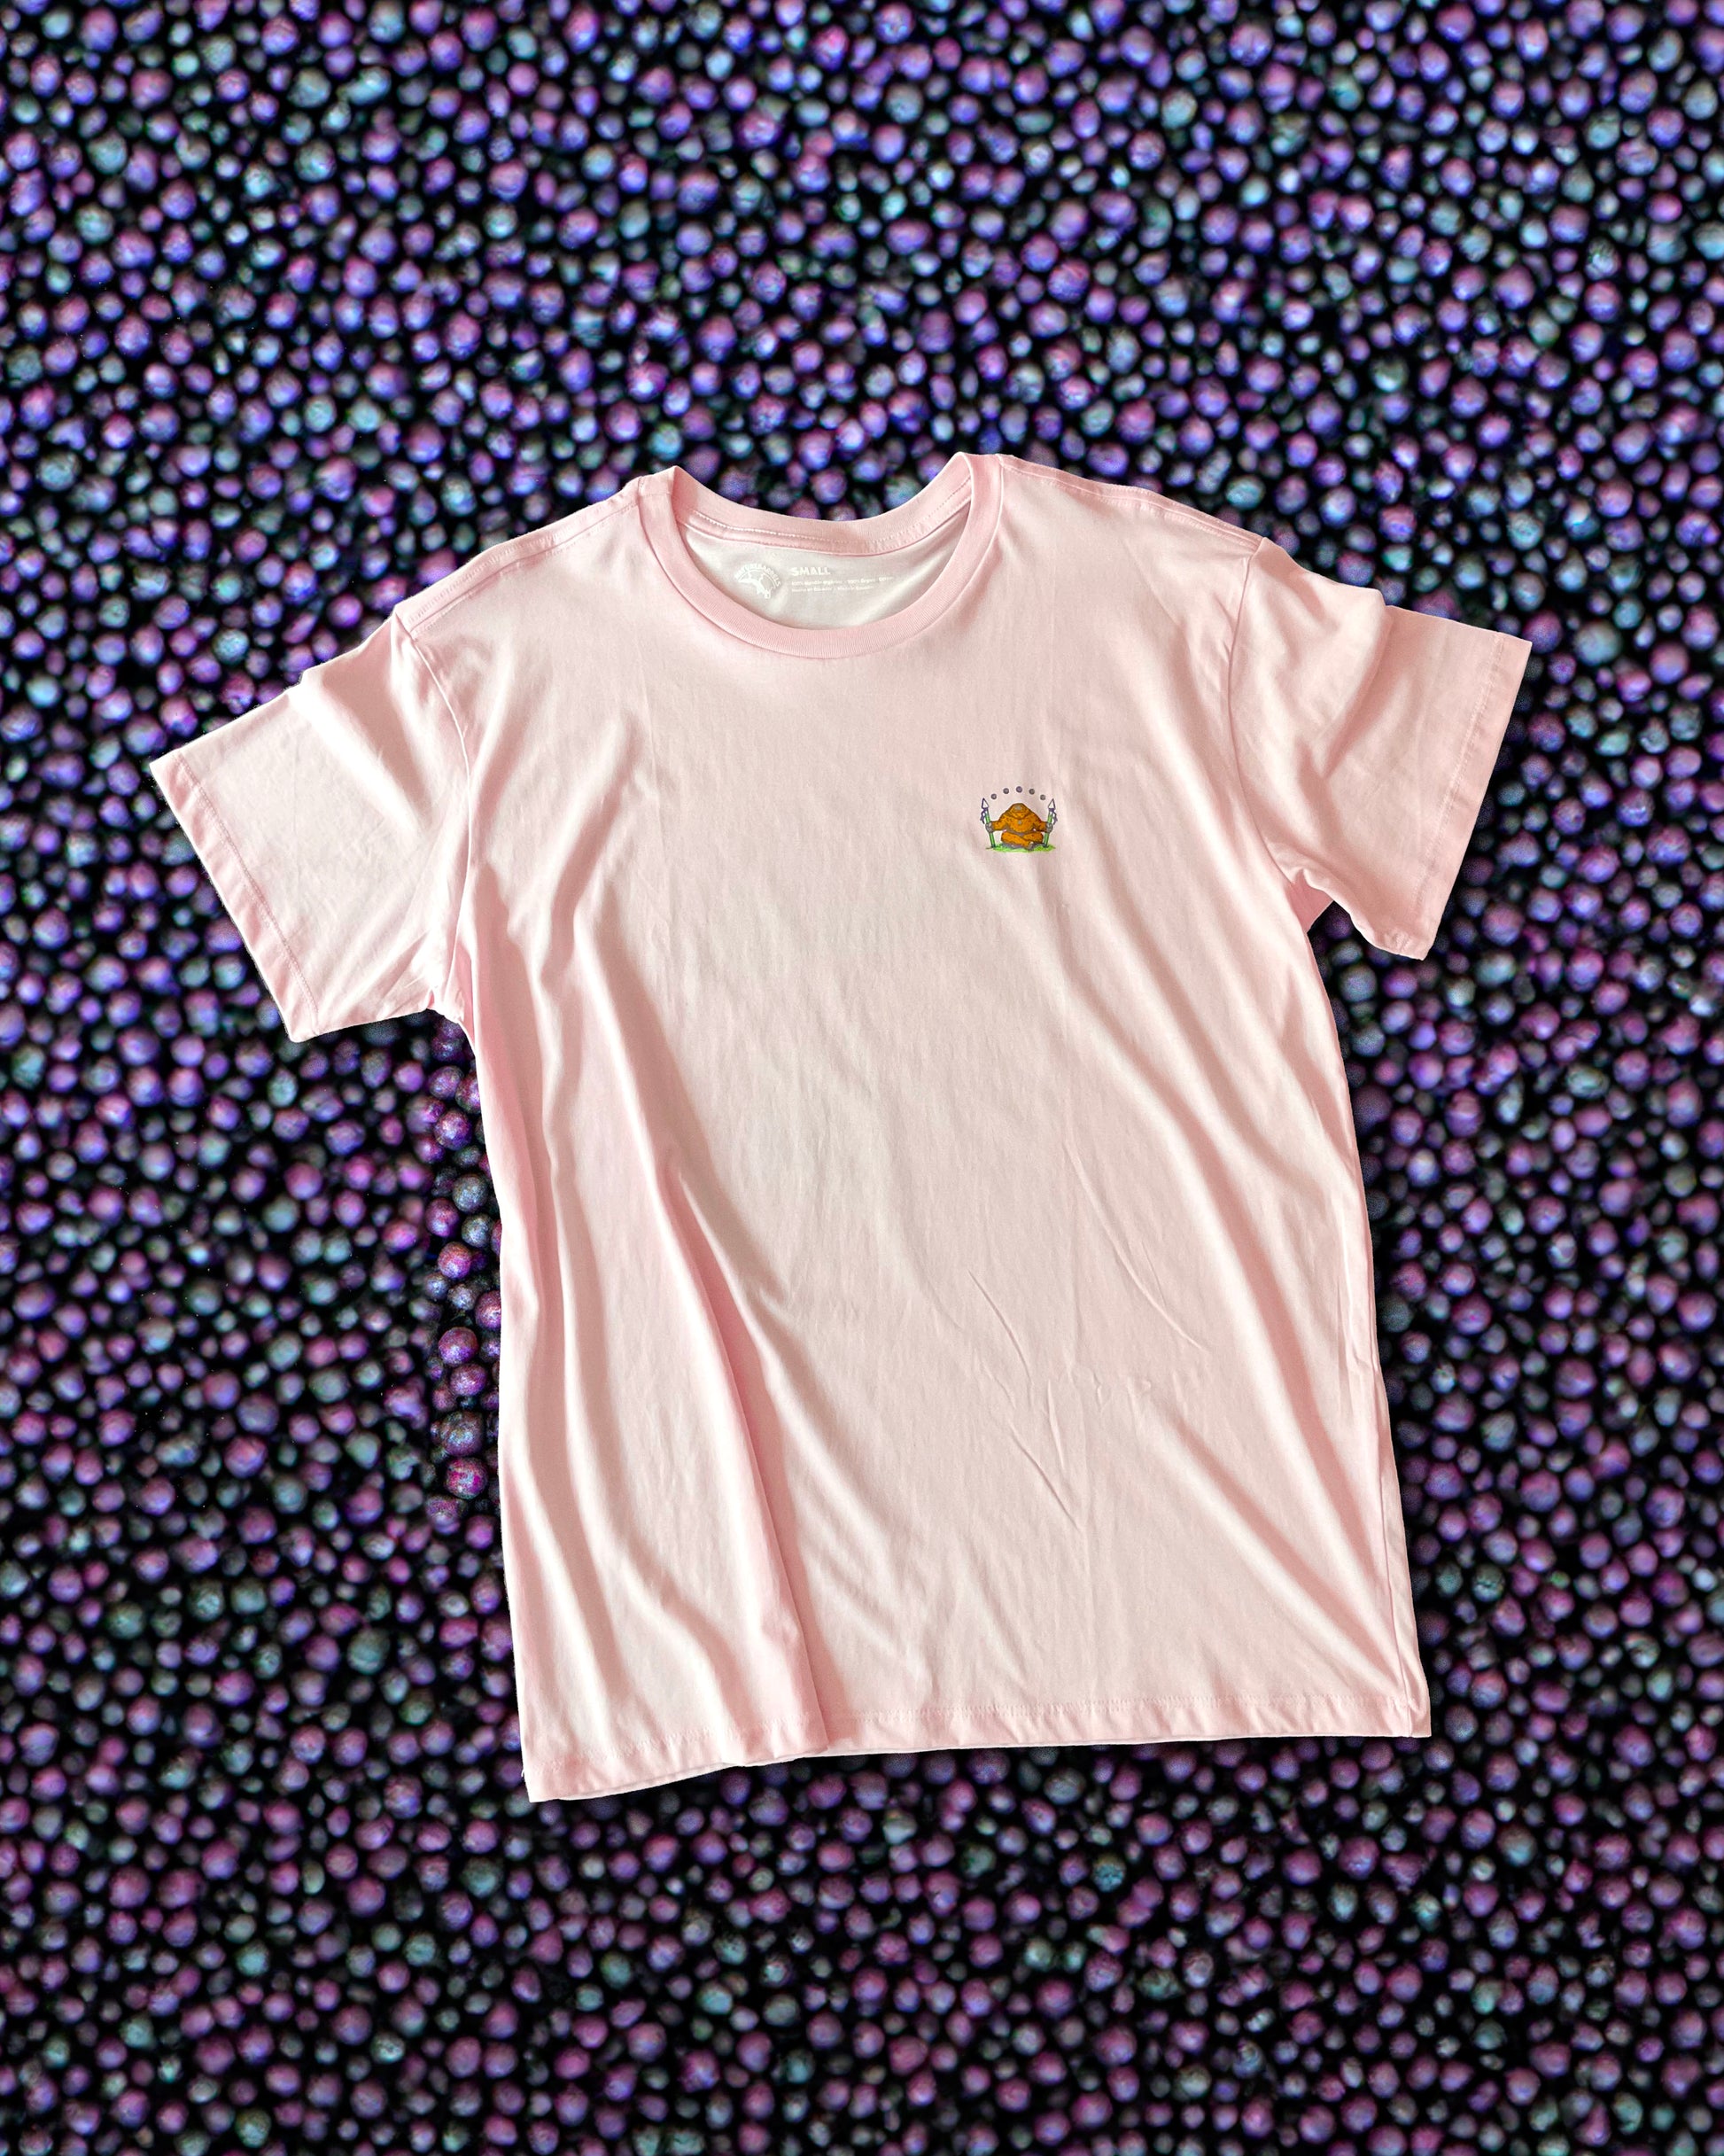 A light pink t-shirt with a small chest print of an orange sasquatch sitting on grass, holding two spheres with acai berries hovering above the sasquatch. The t-shirt is lying flat against a background of acai berries. 